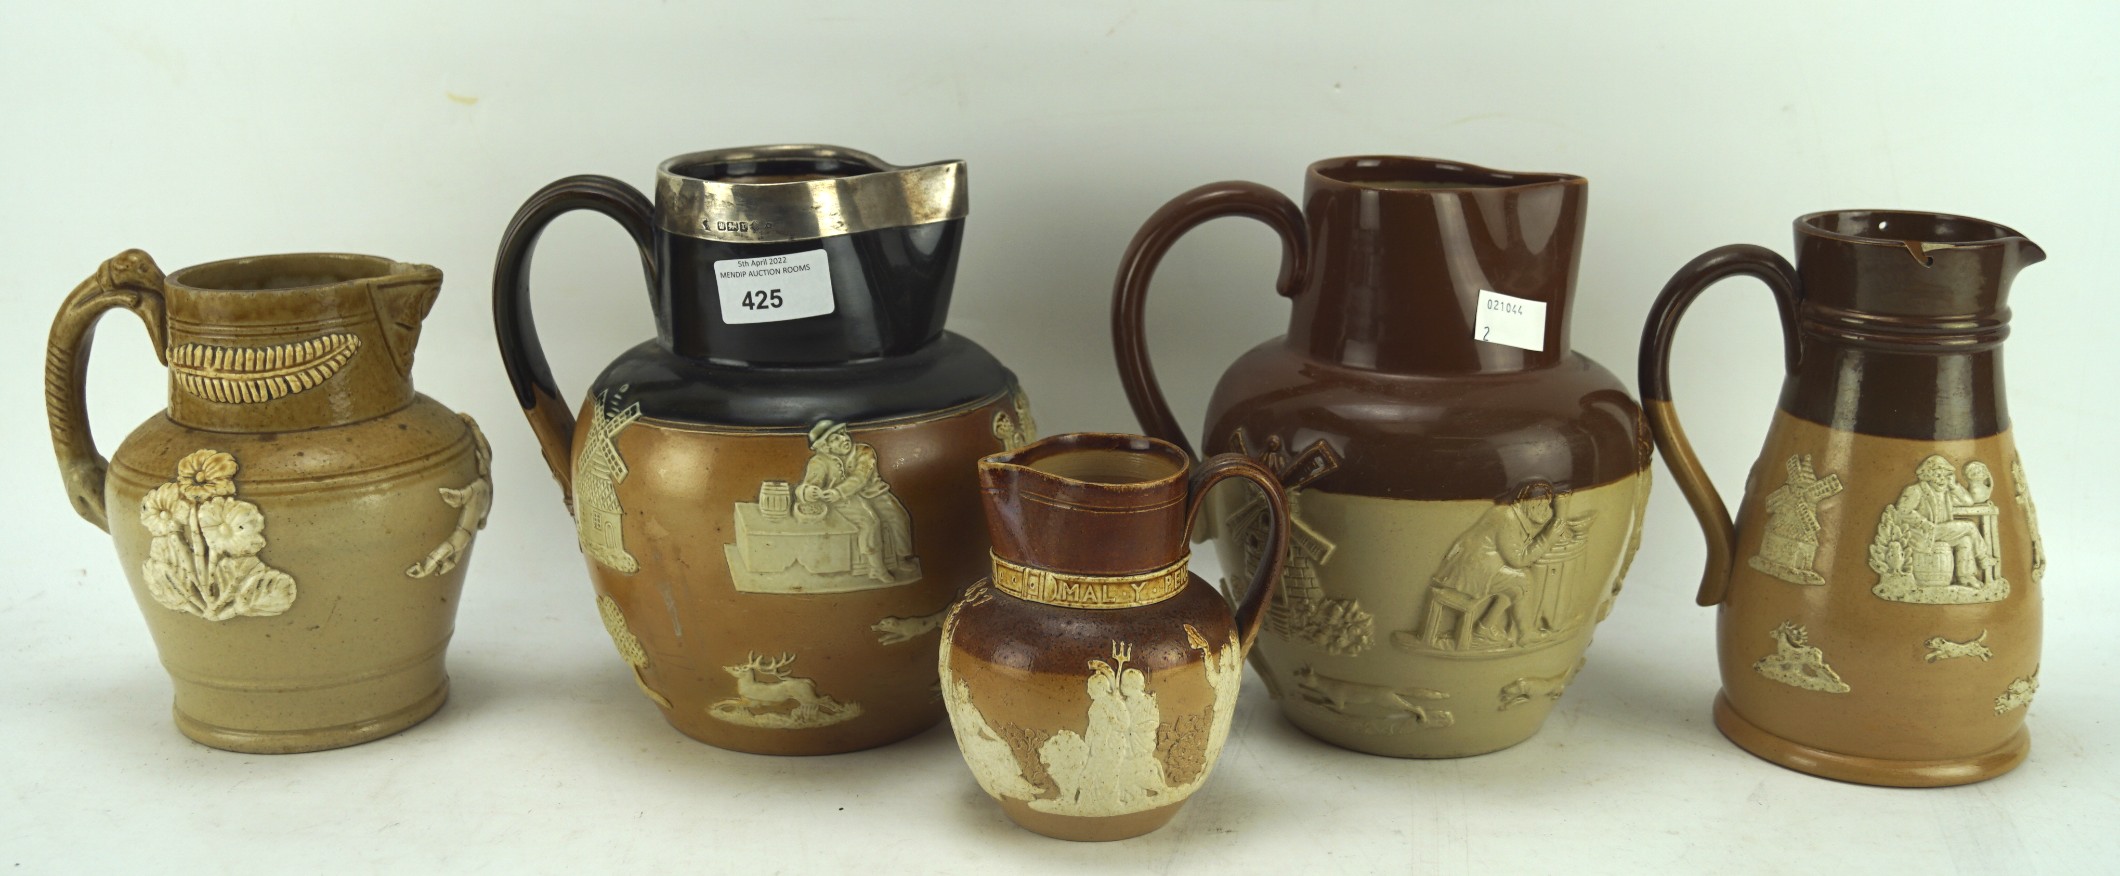 Three Royal Doulton/Lambeth stoneware jugs and two similar, including one silver rimmed example,